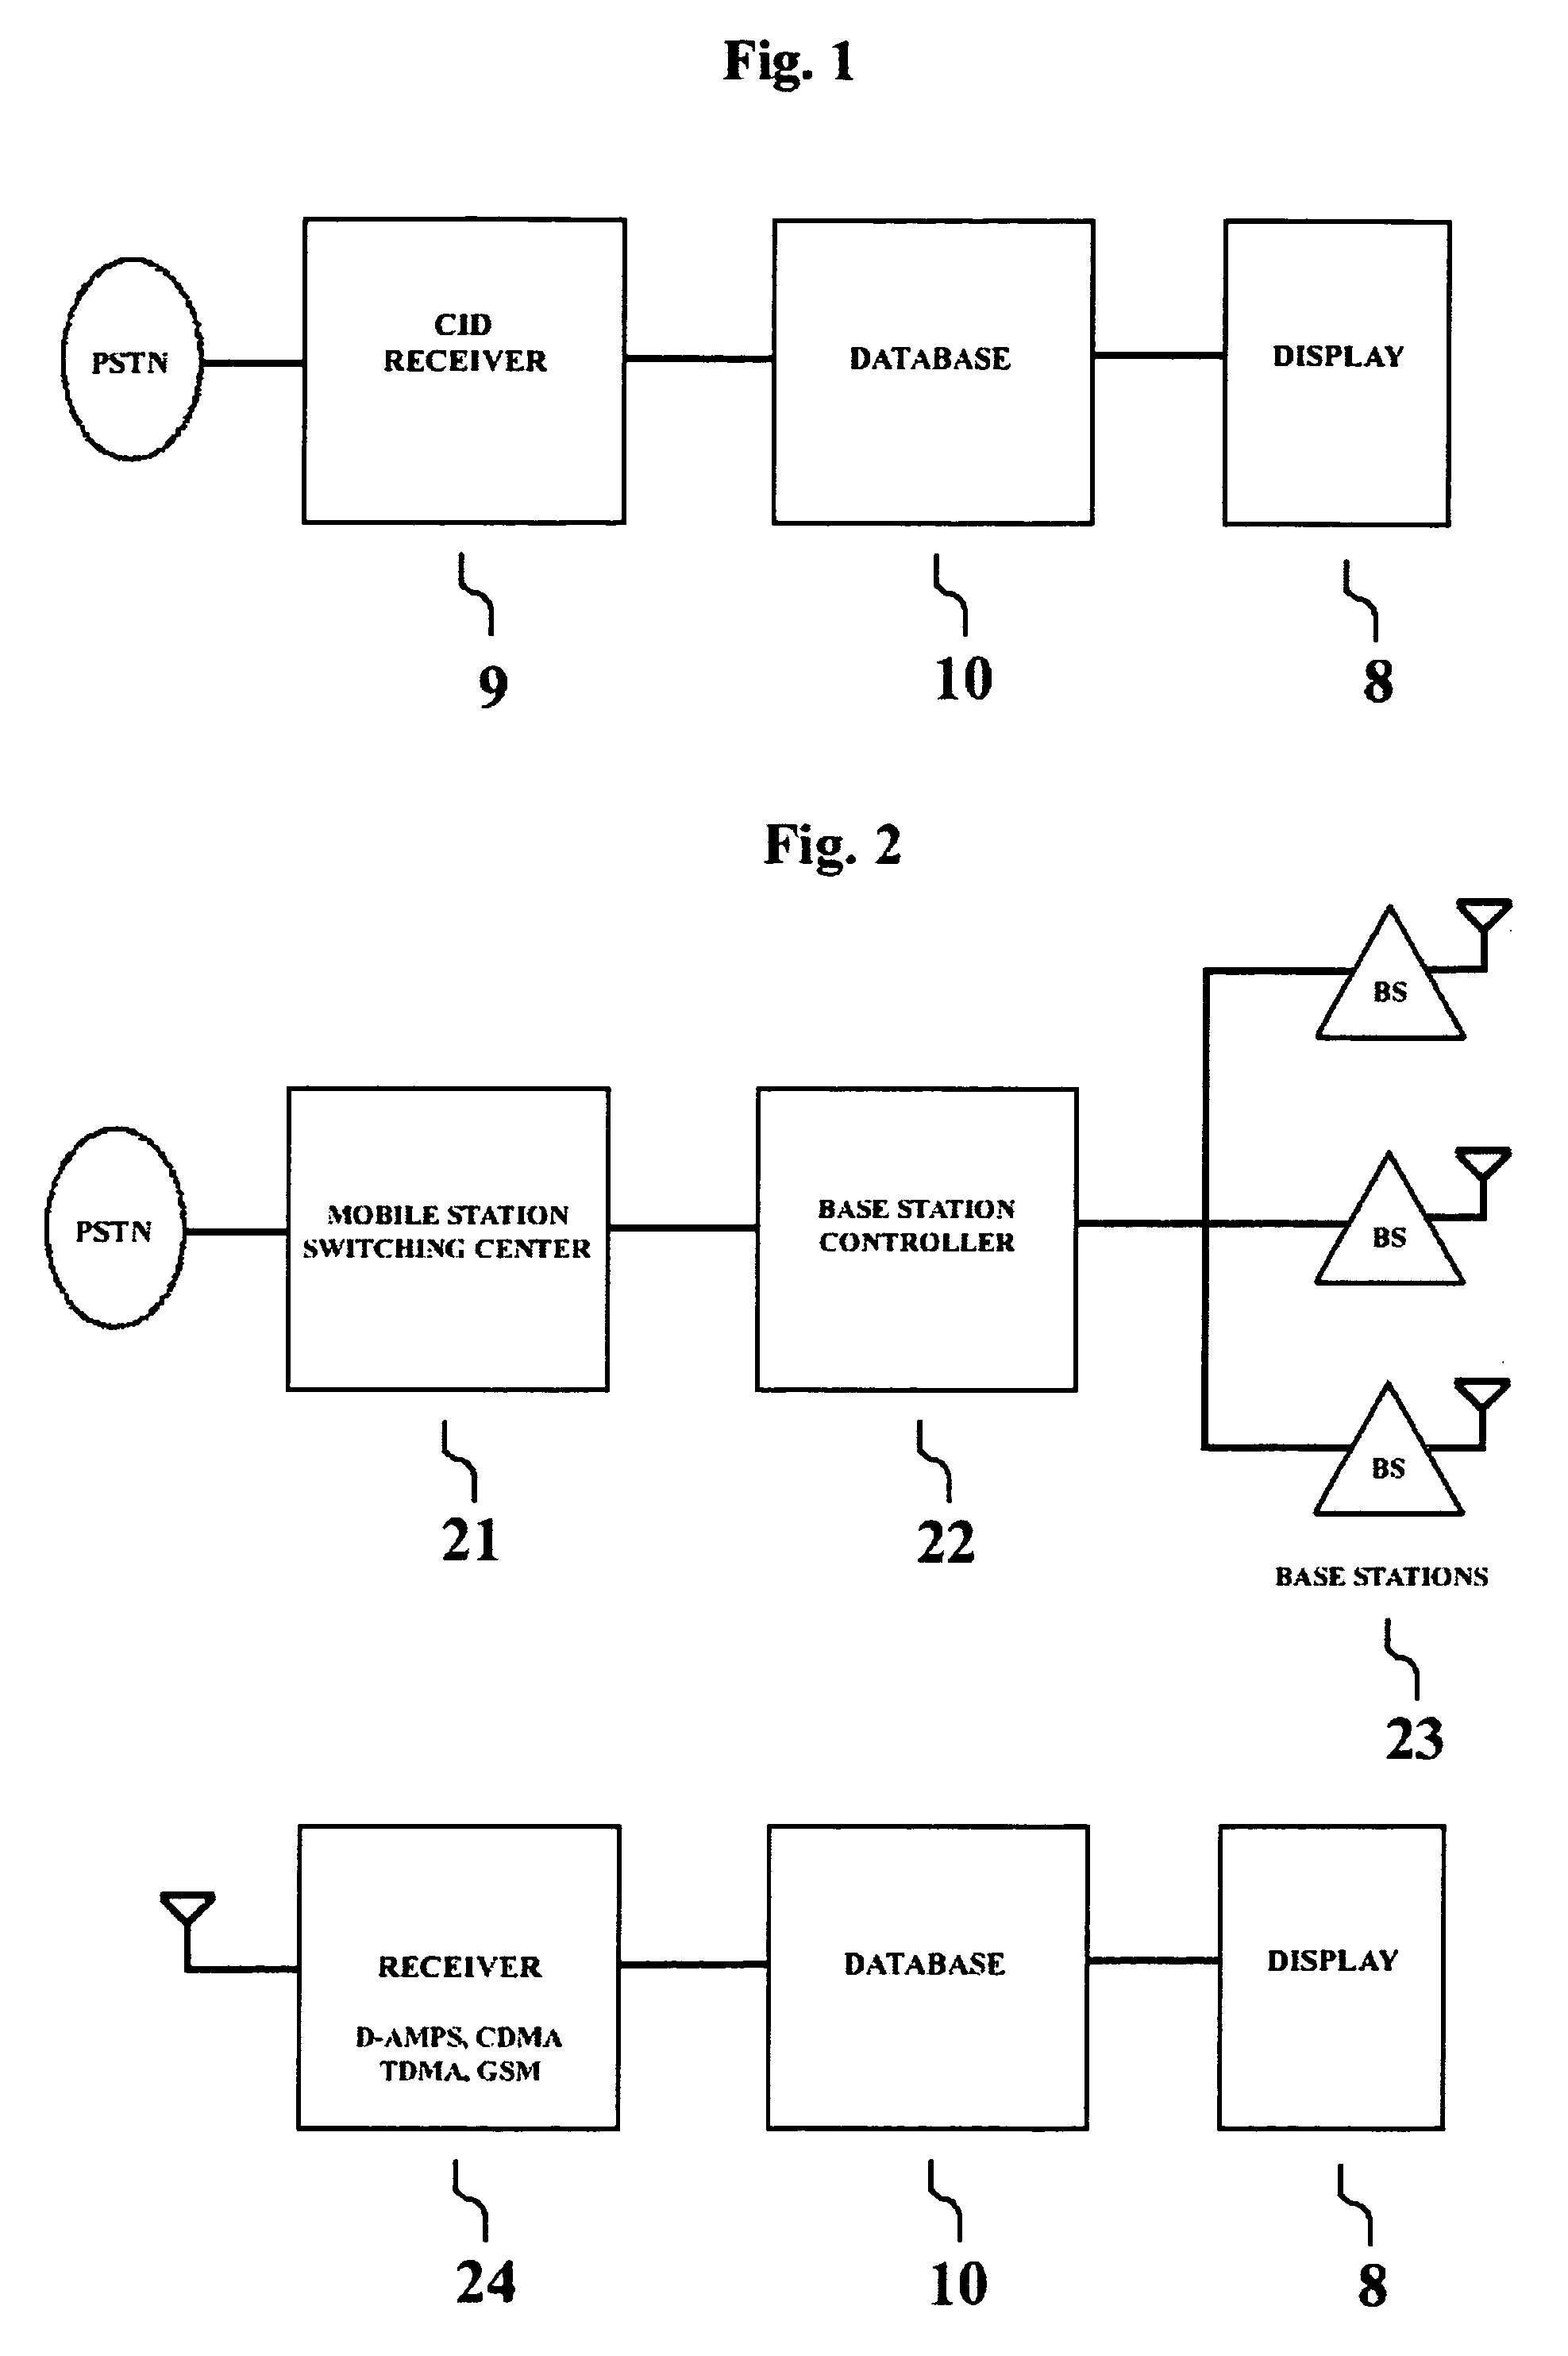 Decoding and processing system for advanced determination and display of city and state caller information